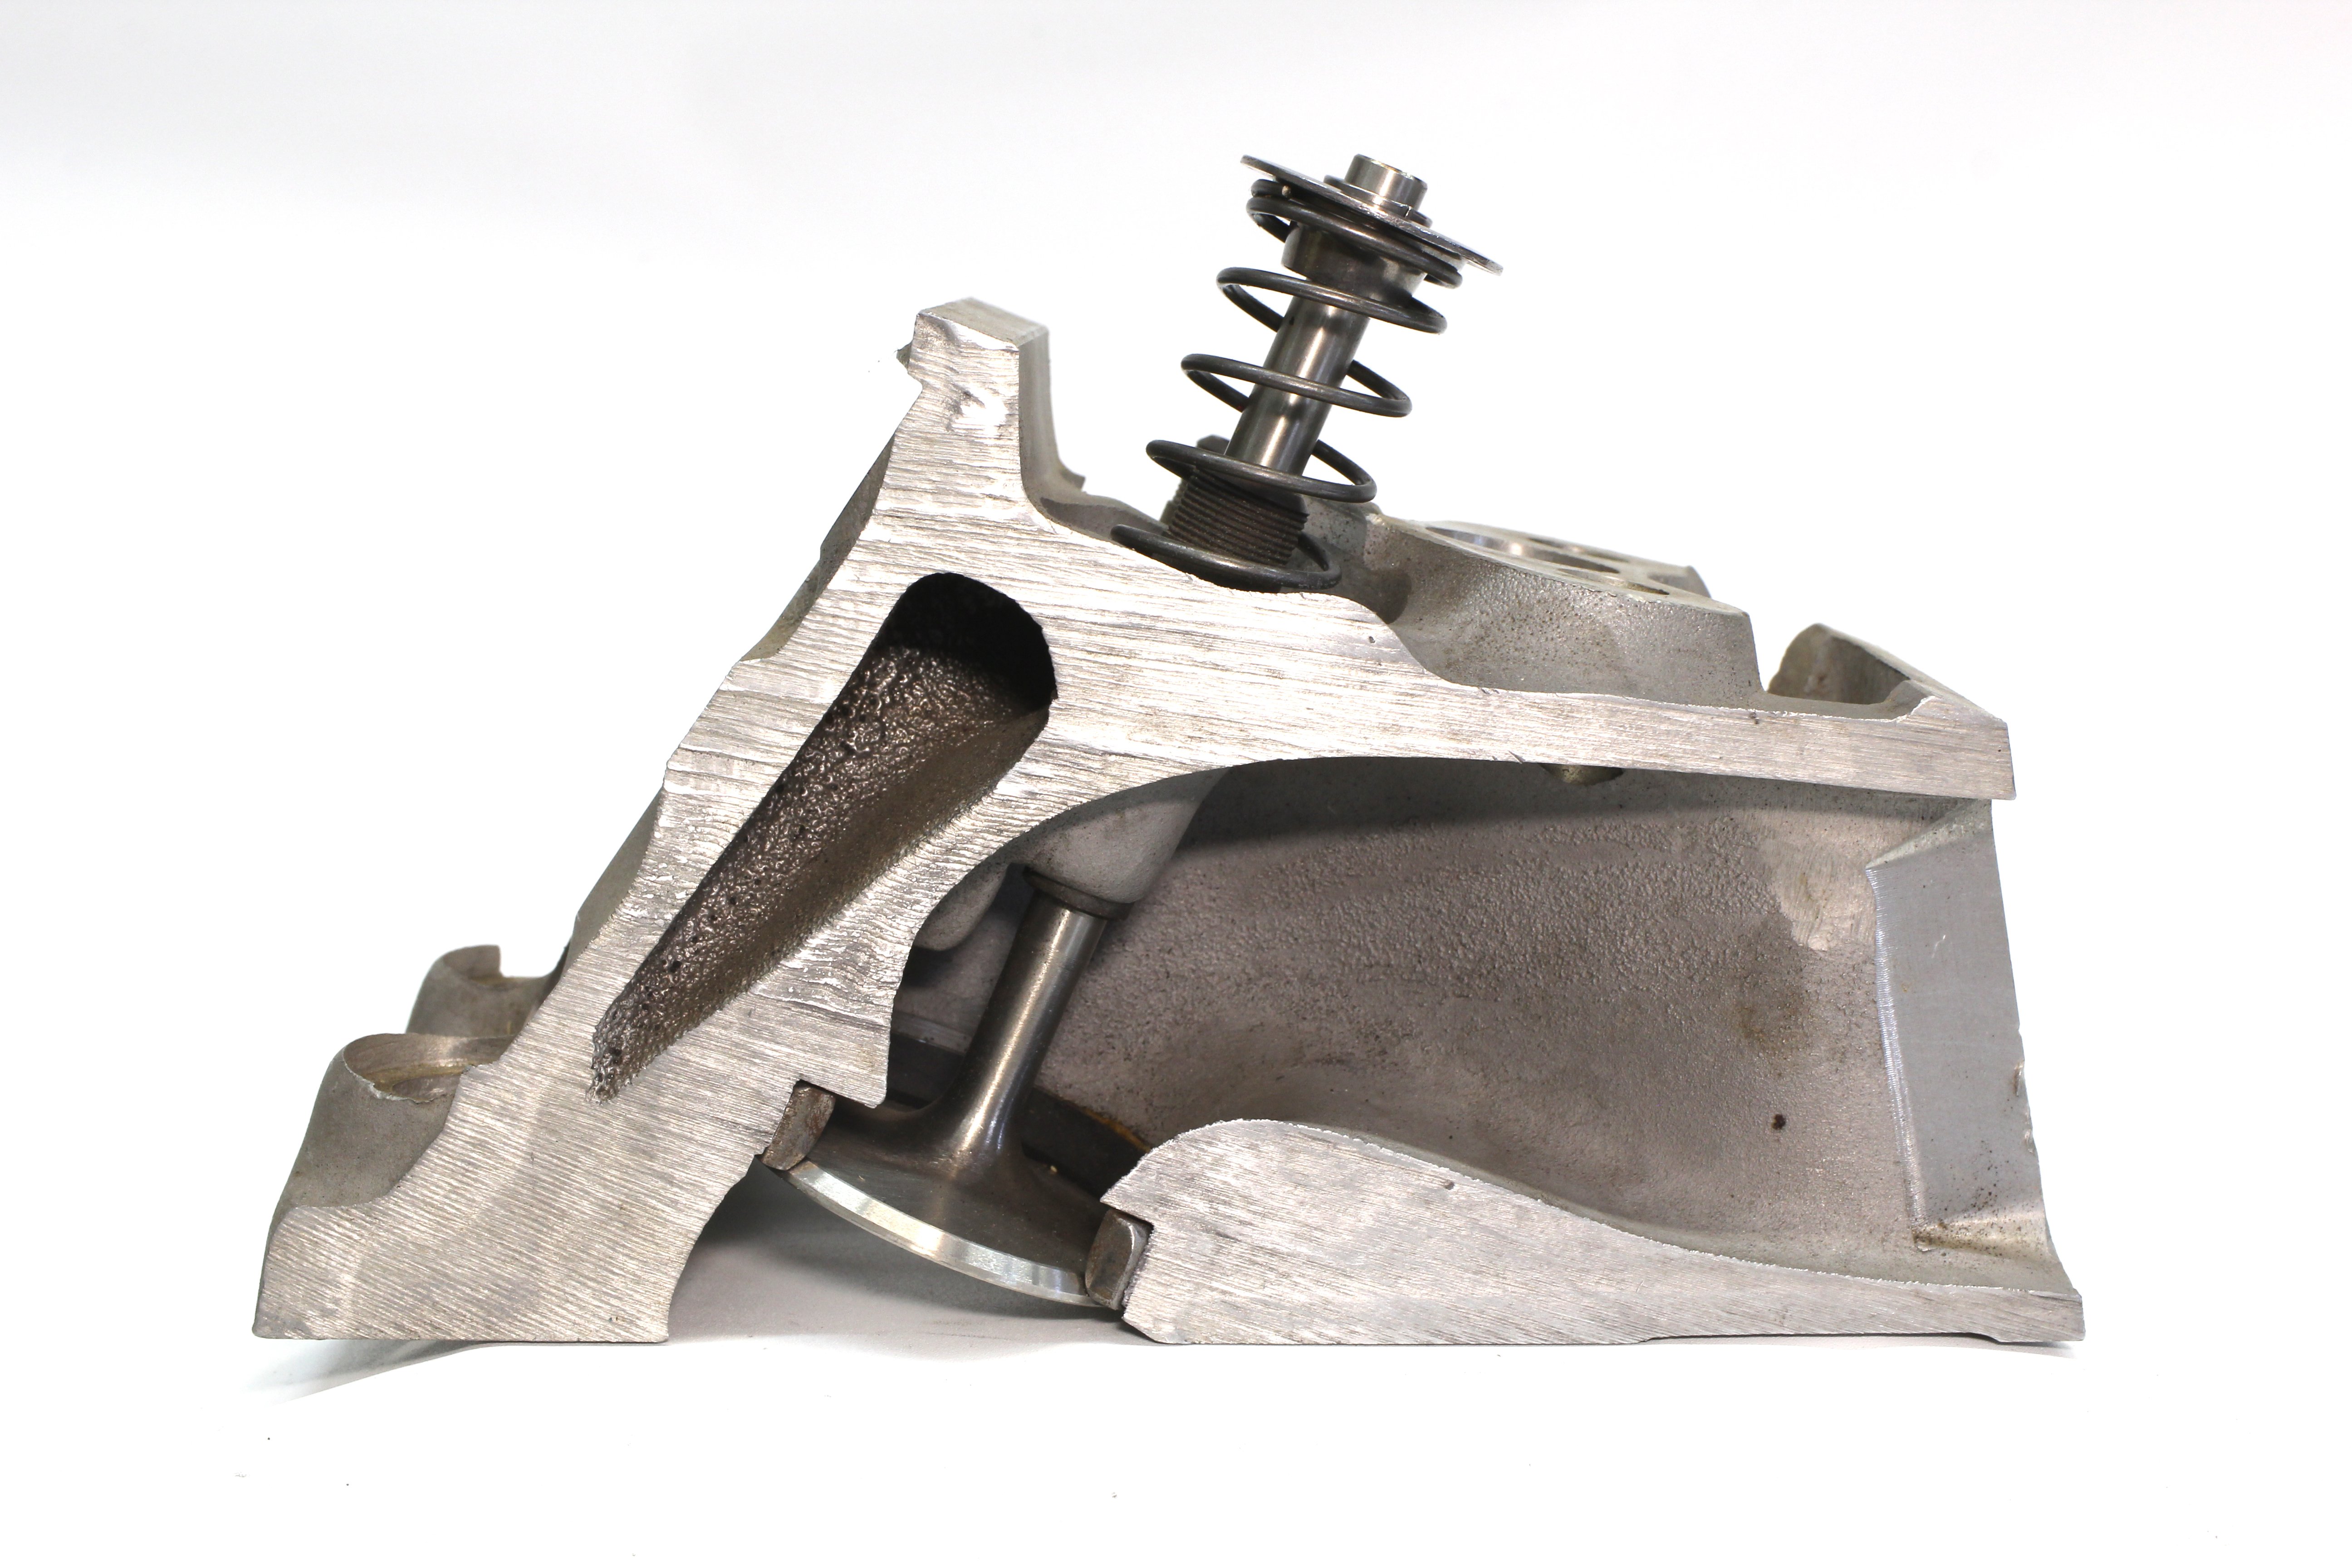 This small-block Chevy head cutaway illustrates the valve angle as measured from true vertical. The stock small-block angle is 23 degrees but as the angle approaches true vertical, the port flow improves. This is why the original production LS heads use a 15-degree valve angle. 